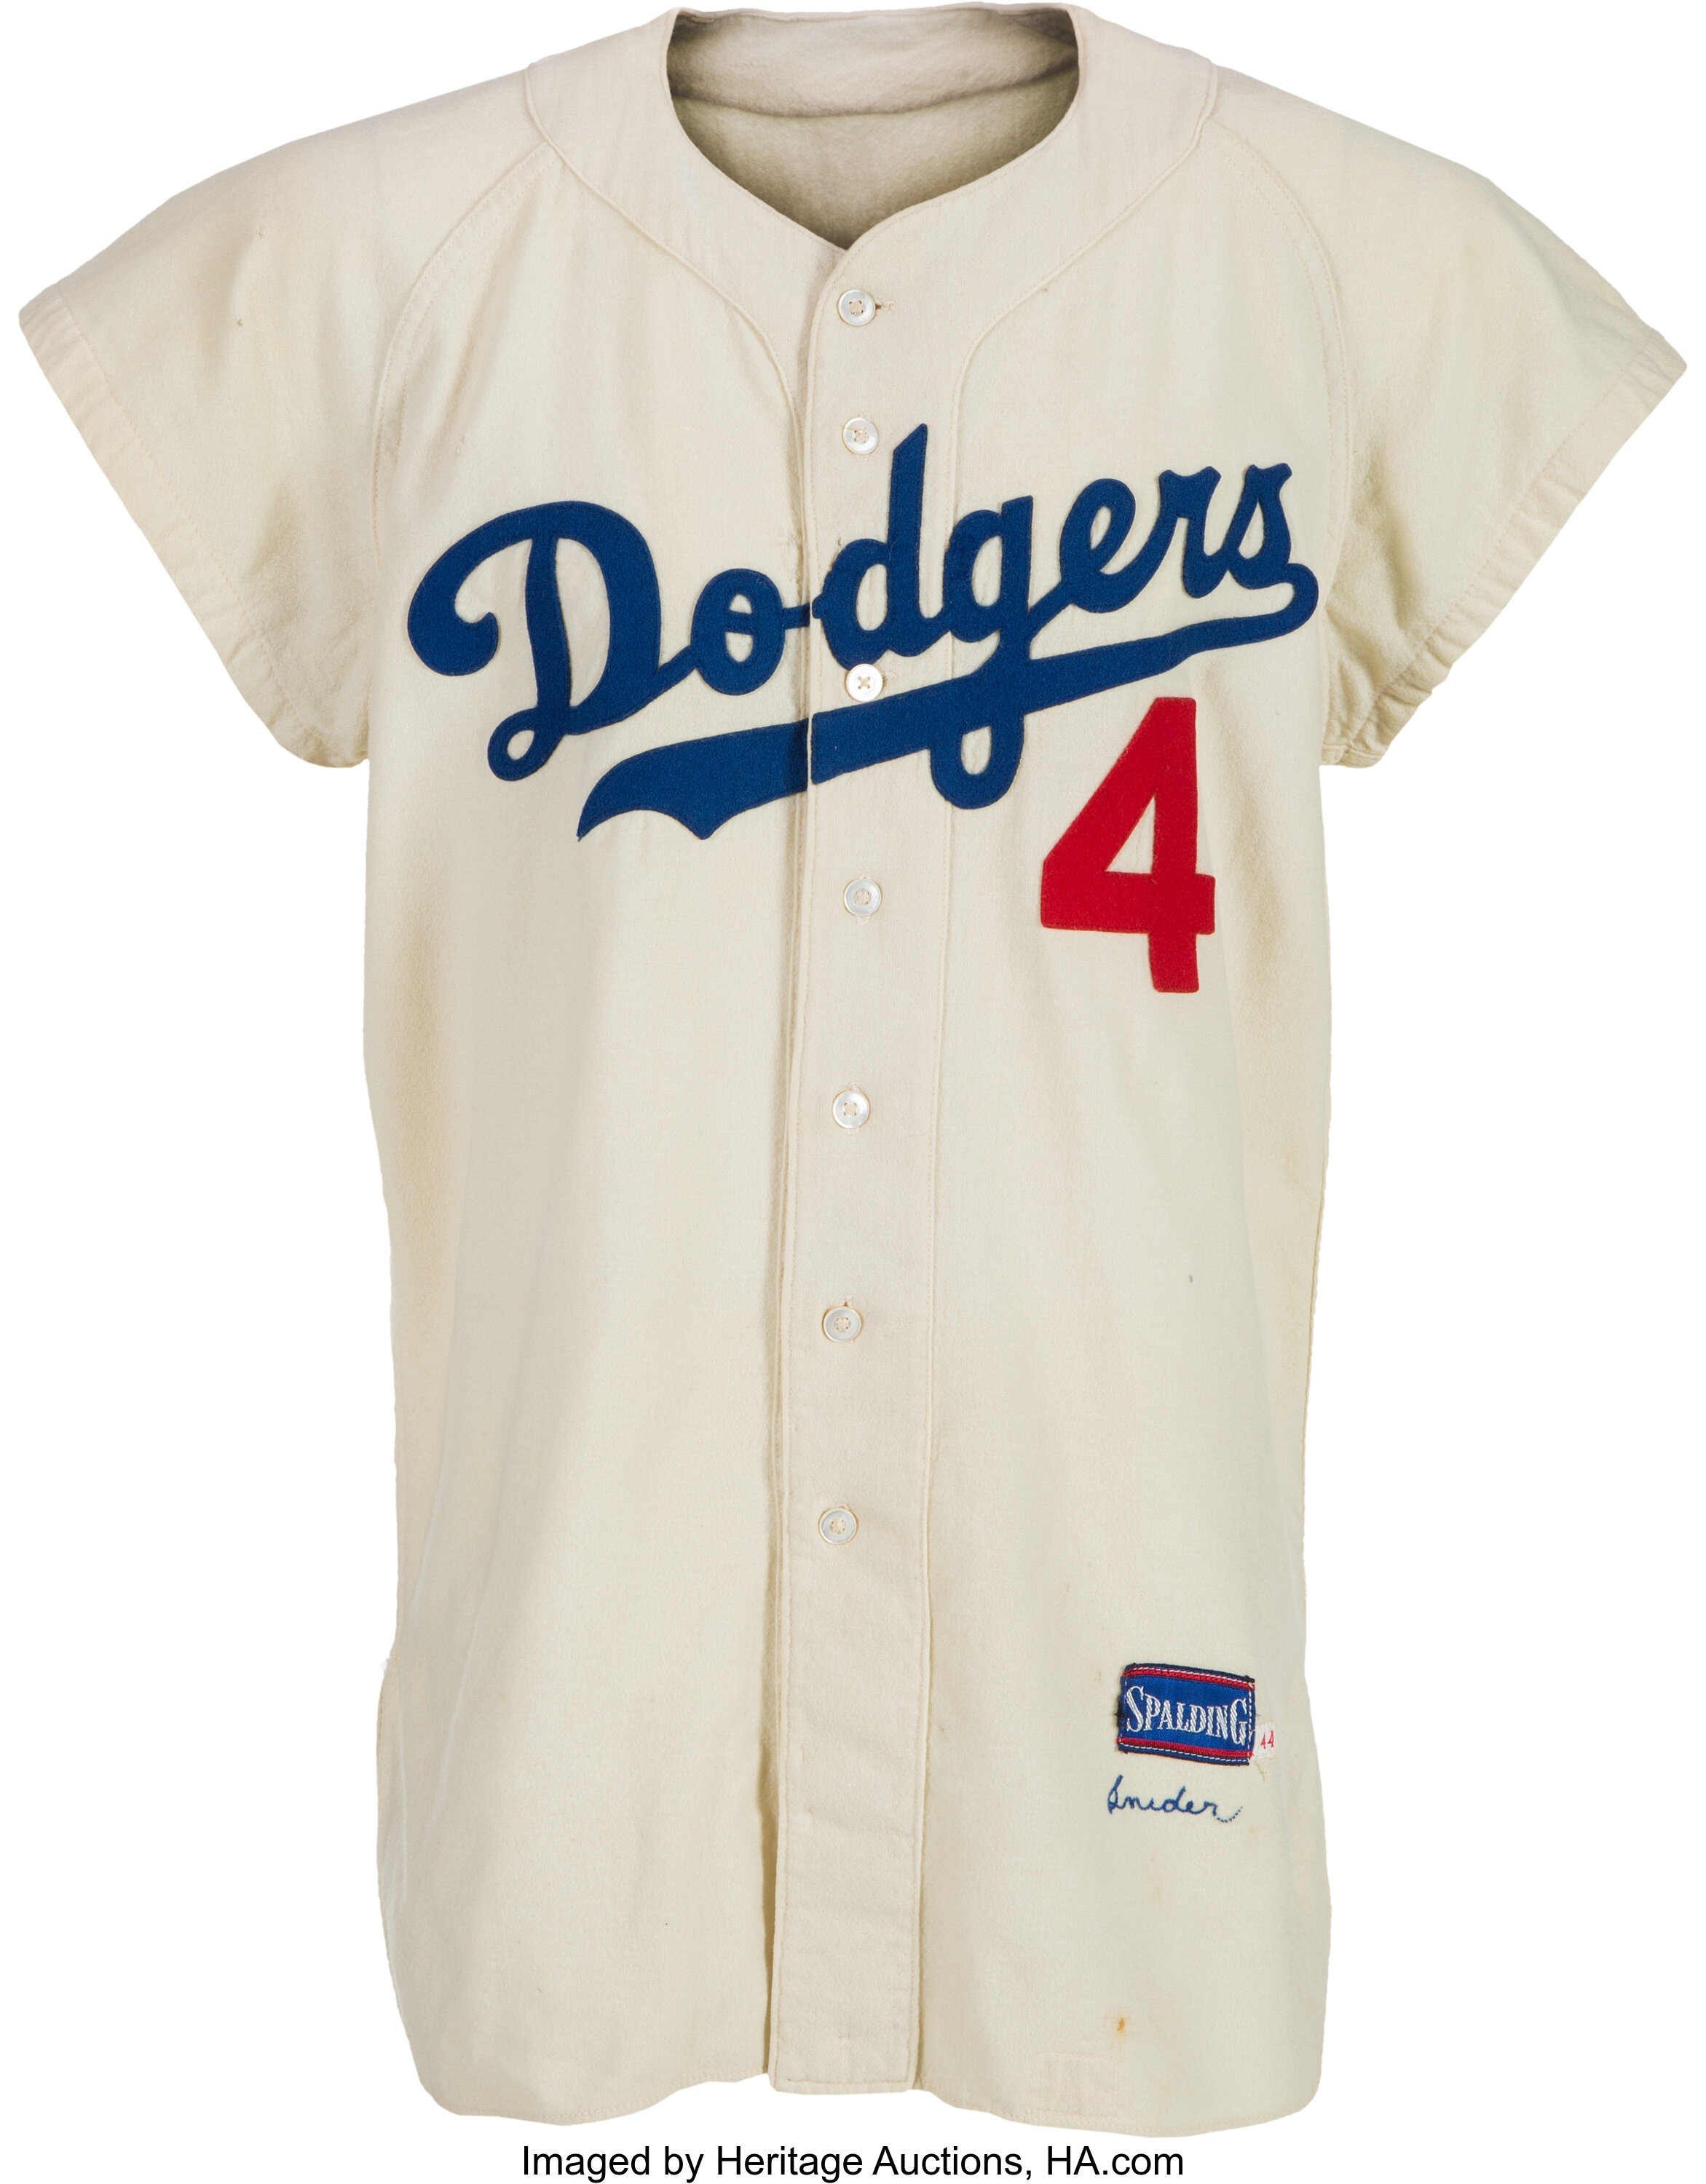 Duke Snider Brooklyn Dodgers Men's Home White Cooperstown Jersey w/ Patch